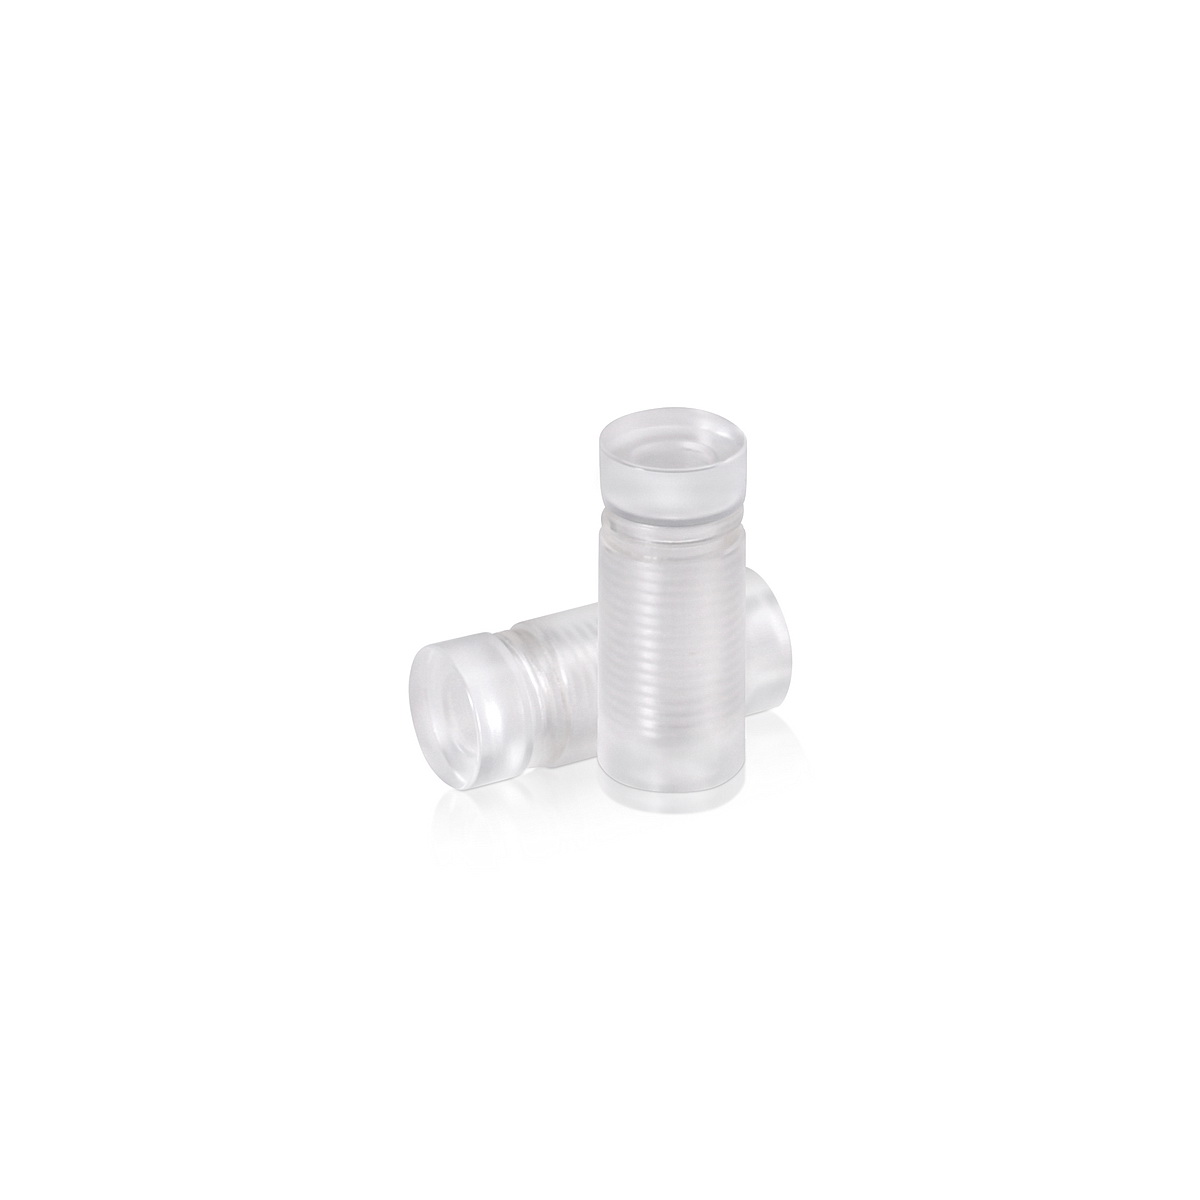 1/2'' Diameter X 2-1/2'' Barrel Length, Clear Acrylic Standoff. Easy Fasten Standoff (For Inside Use Only) Tamper Proof [Required Material Hole Size: 3/8'']